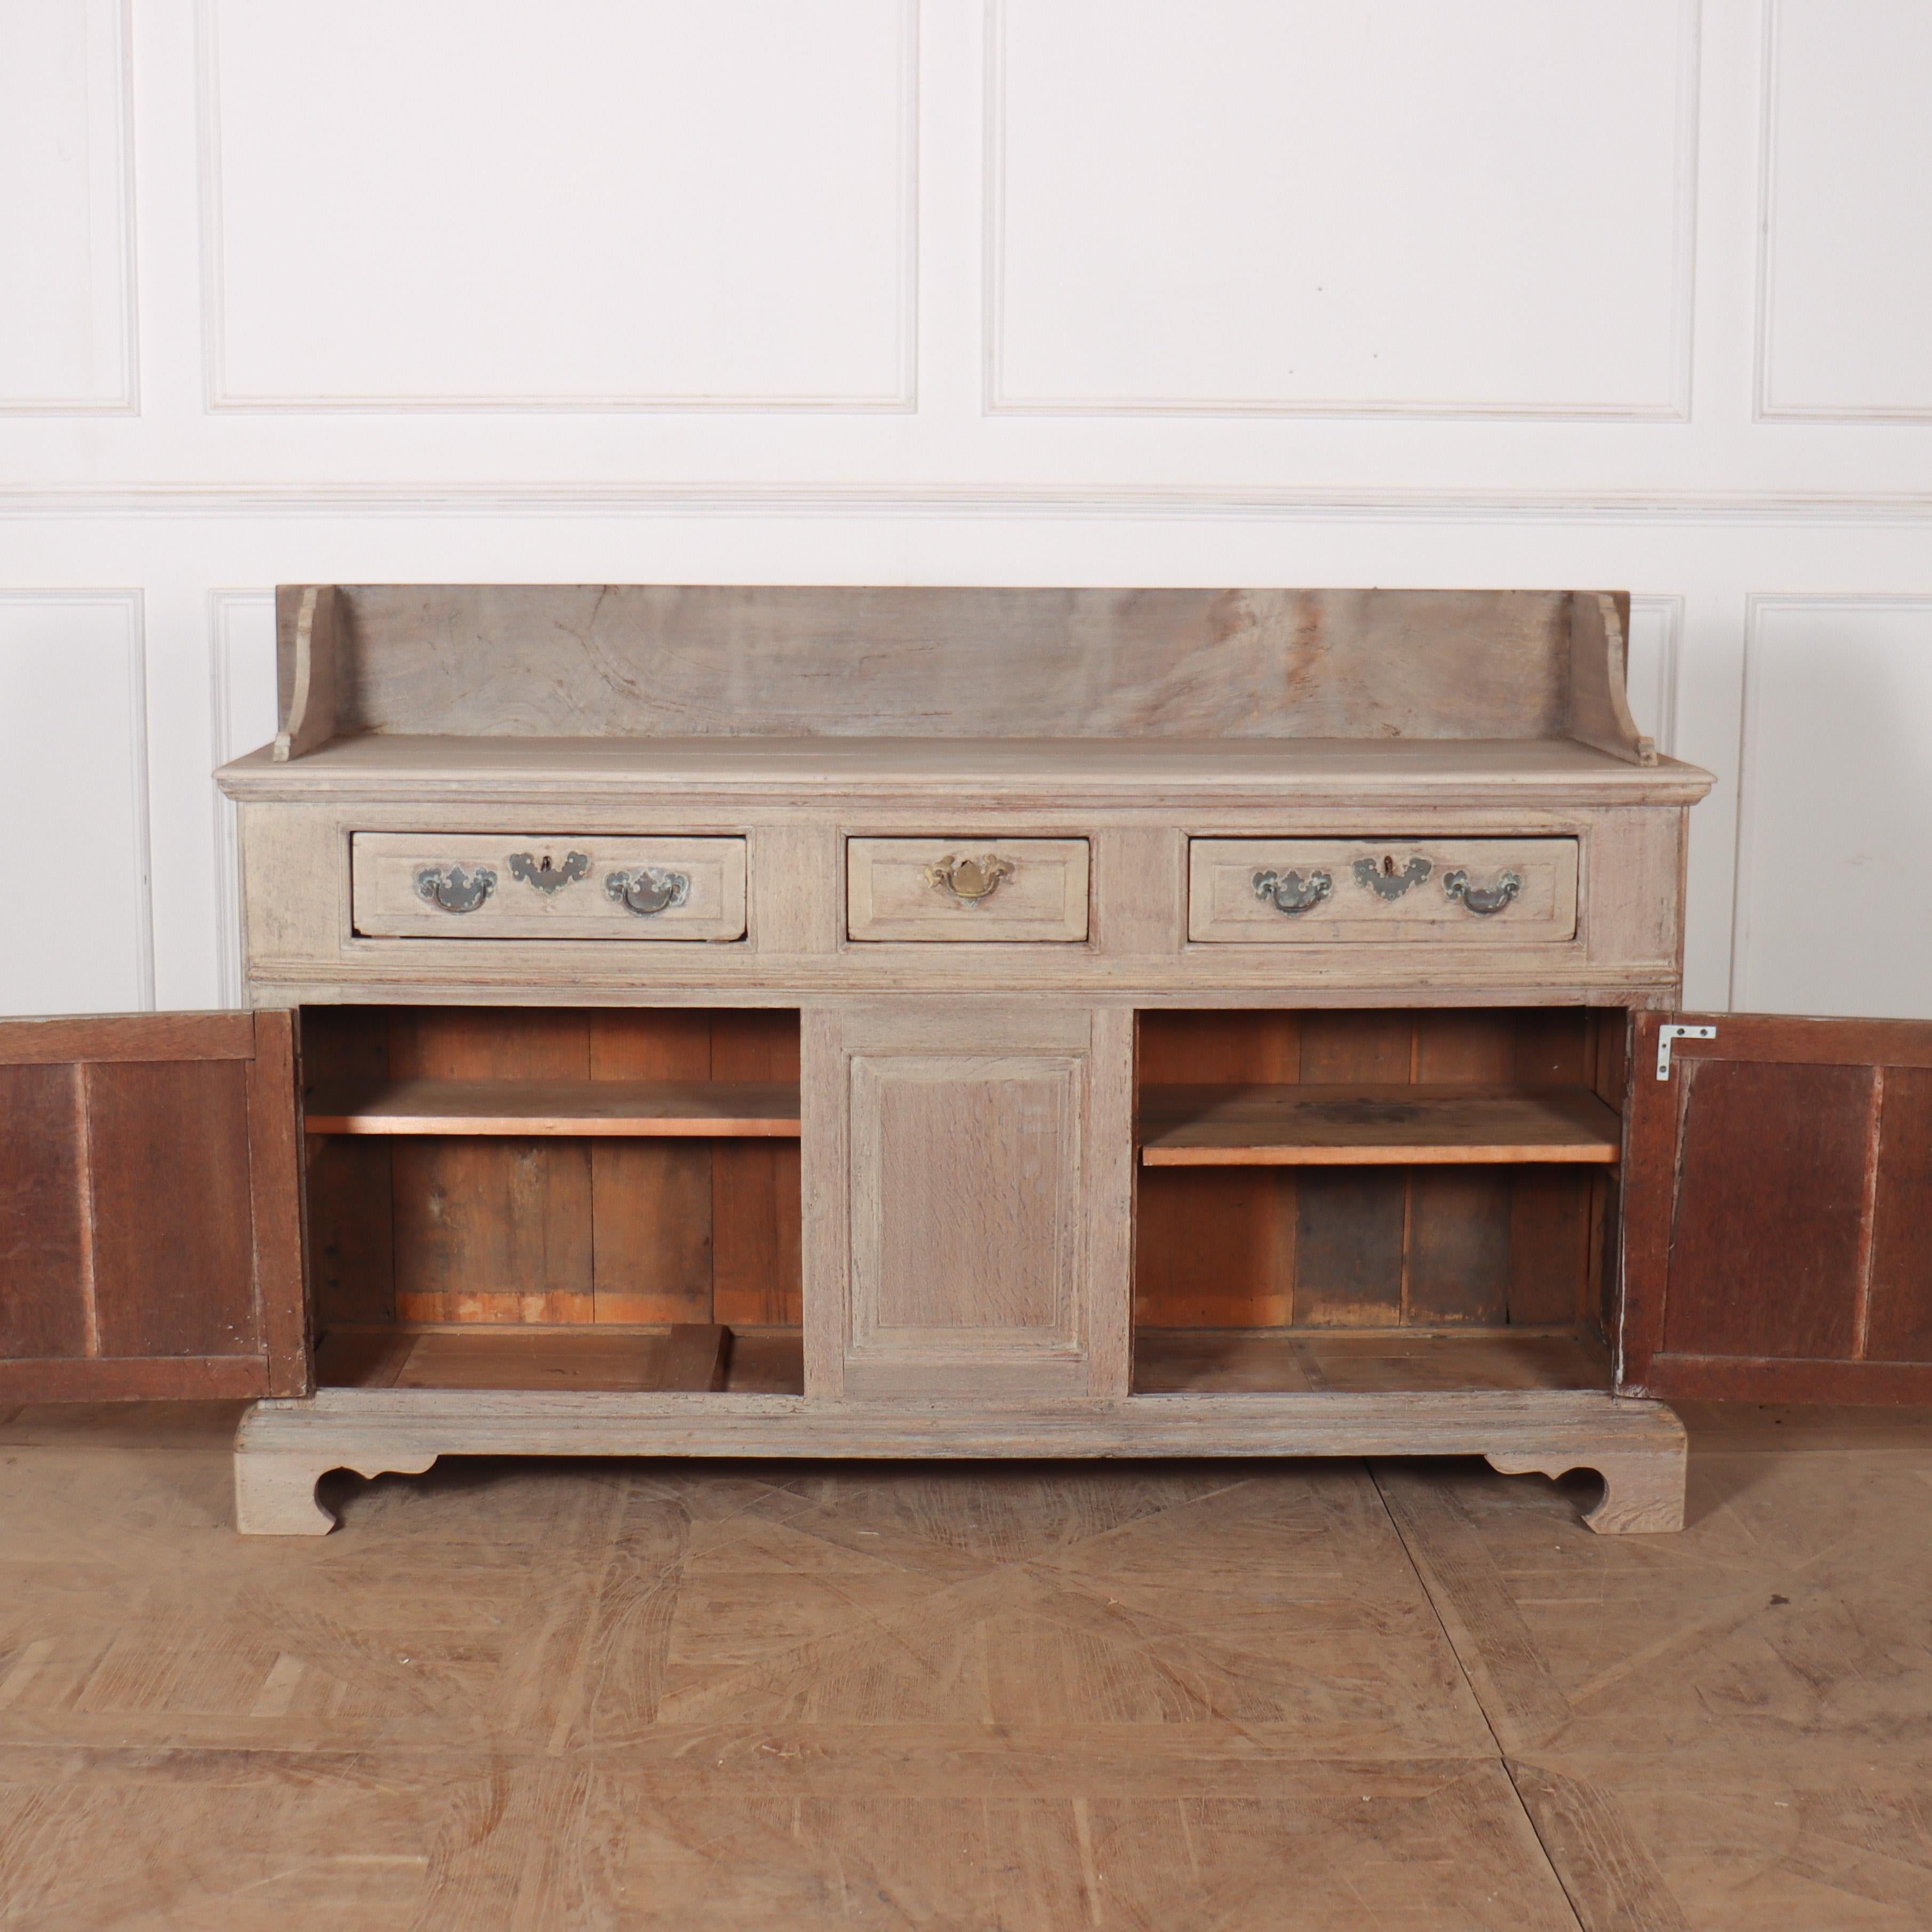 18th Century Bleached Oak Dresser Base In Good Condition For Sale In Leamington Spa, Warwickshire